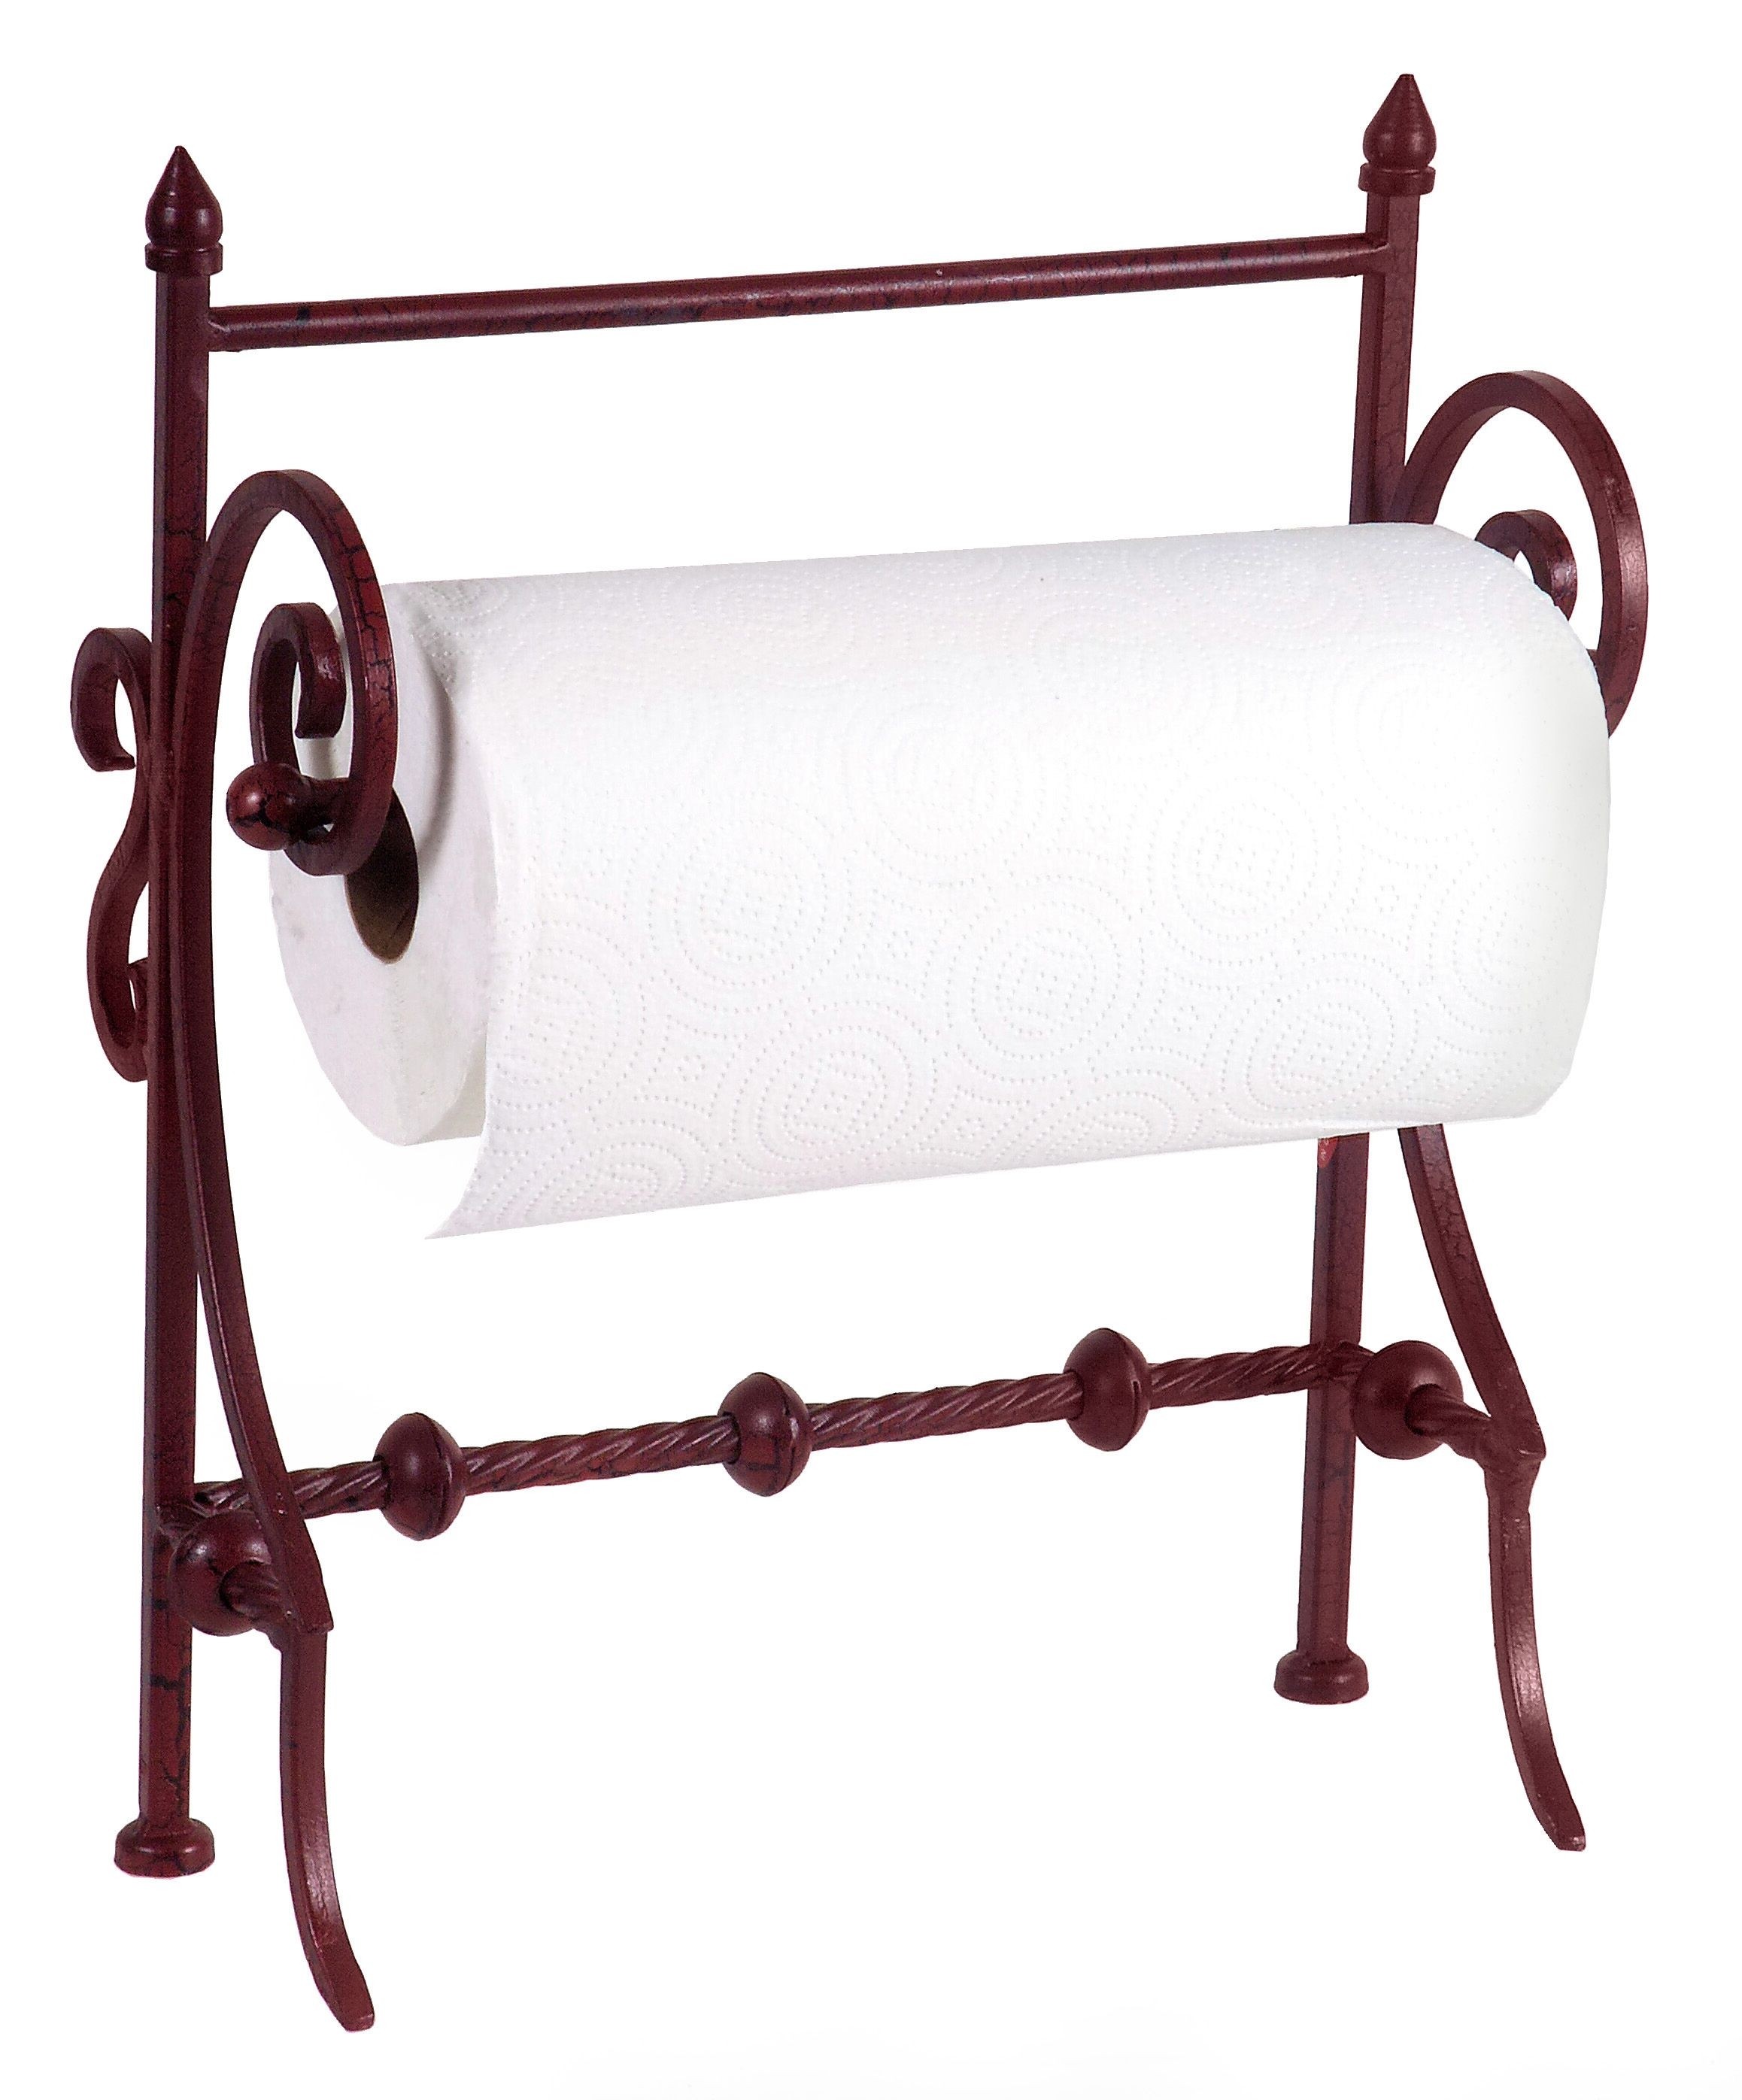 Counter paper towel holders decorative paper towel holder by imax